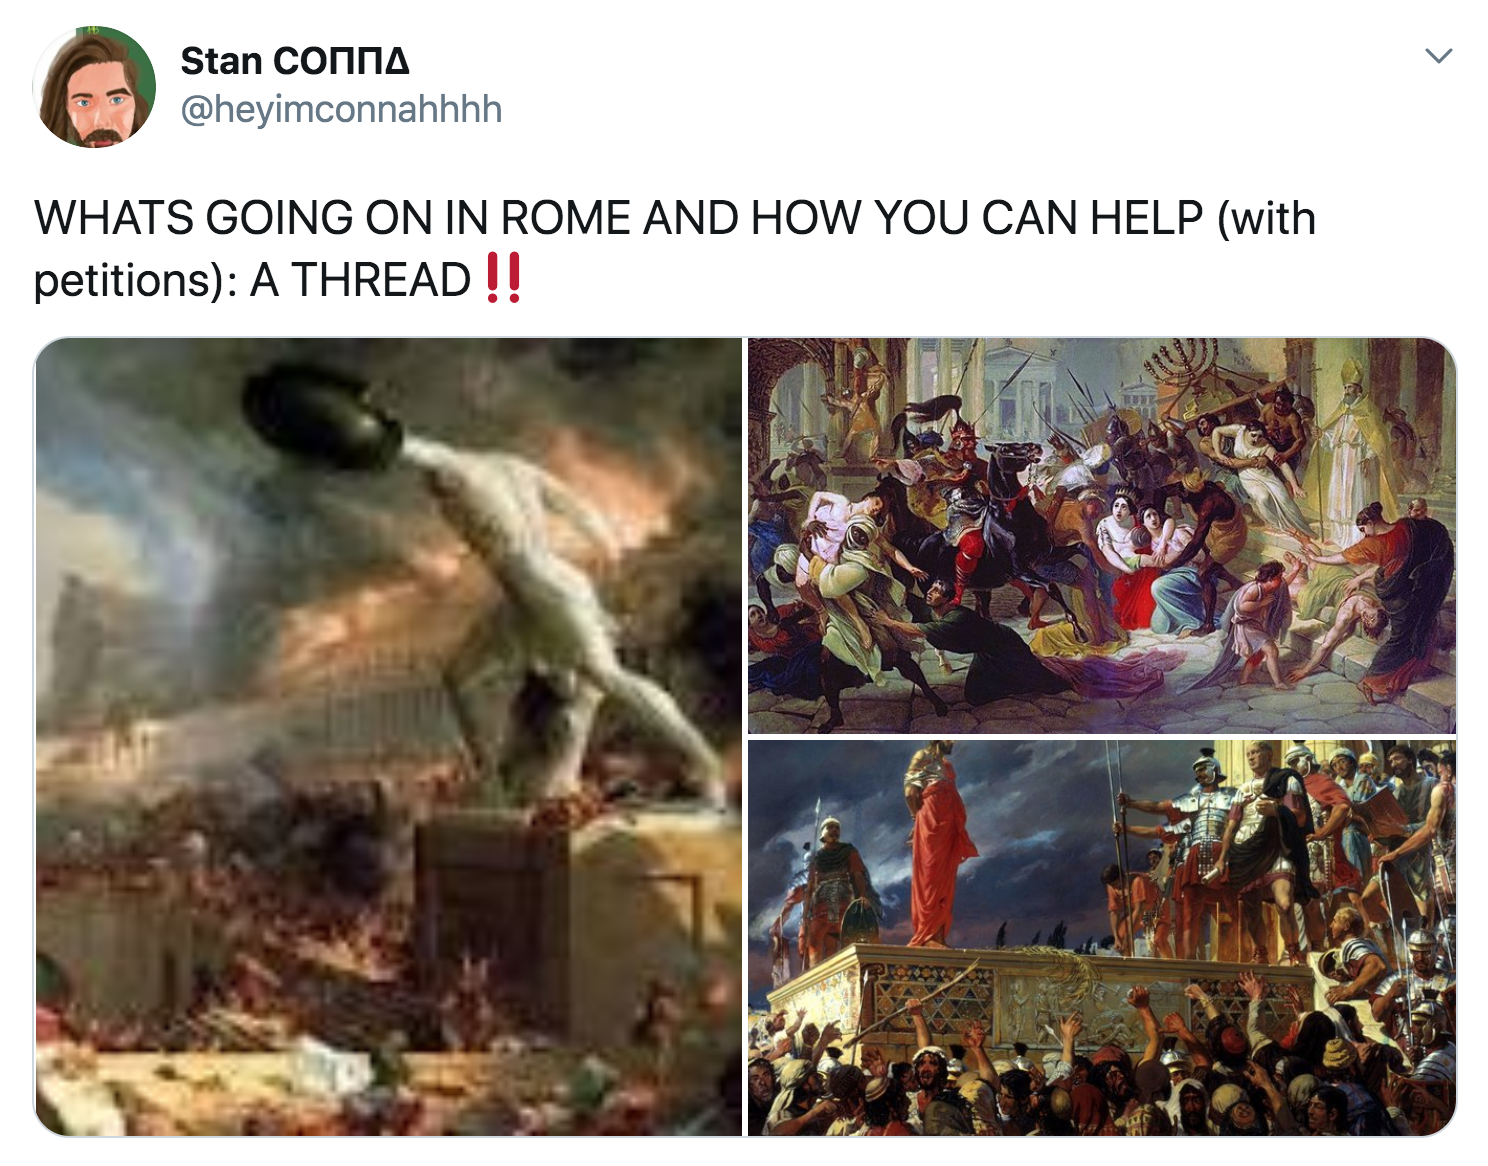 The Course of Empire - Stan C Whats Going On In Rome And How You Can Help with petitions A Thread !! 17